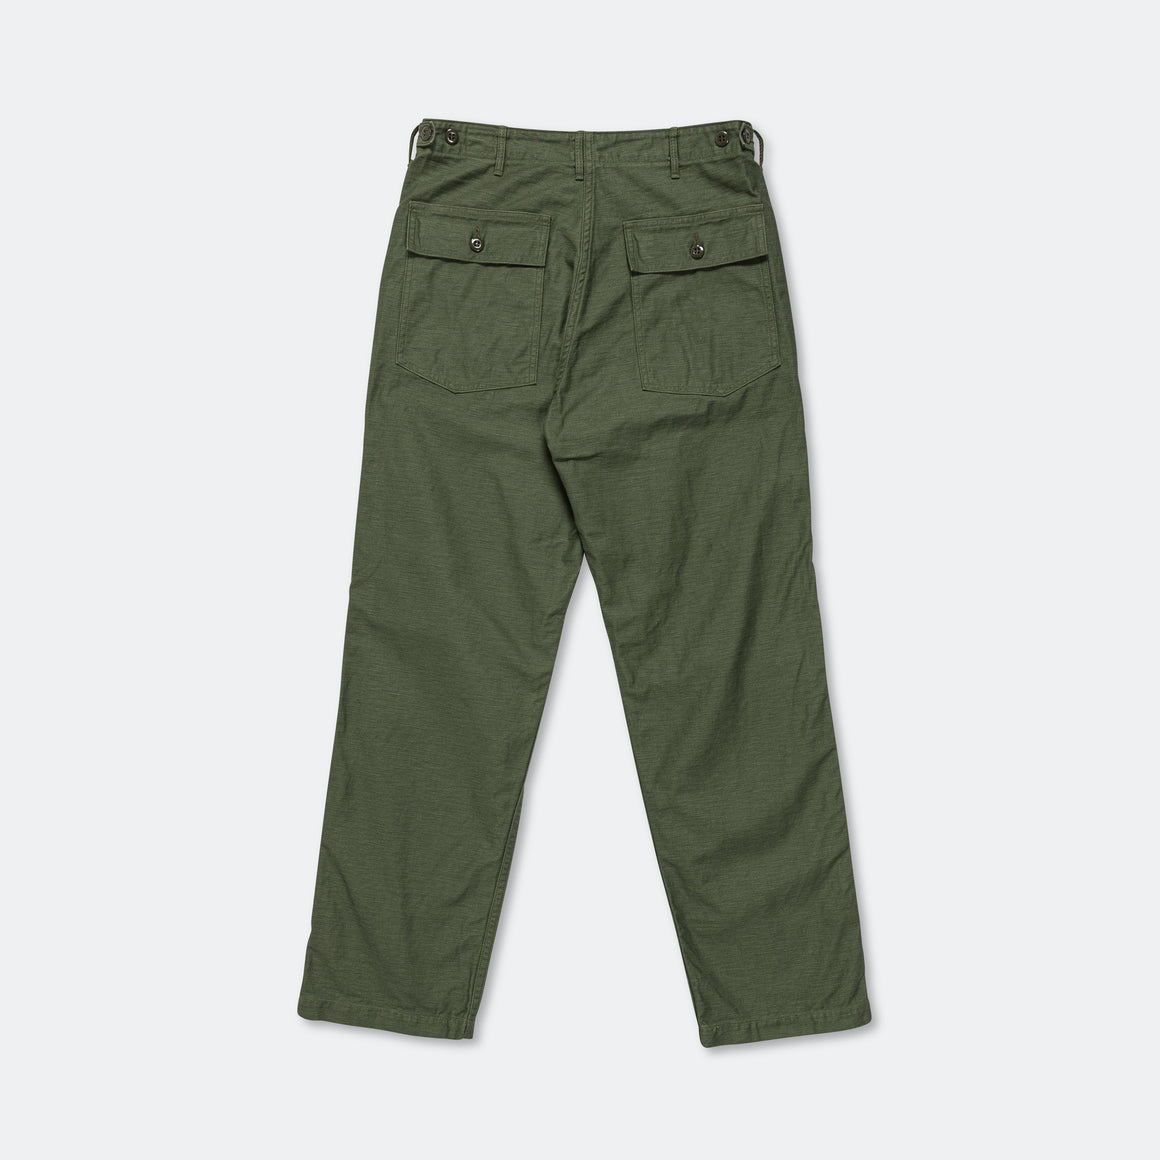 orSlow - US Army Fatigue Pants (Regular Fit) - Green - UP THERE